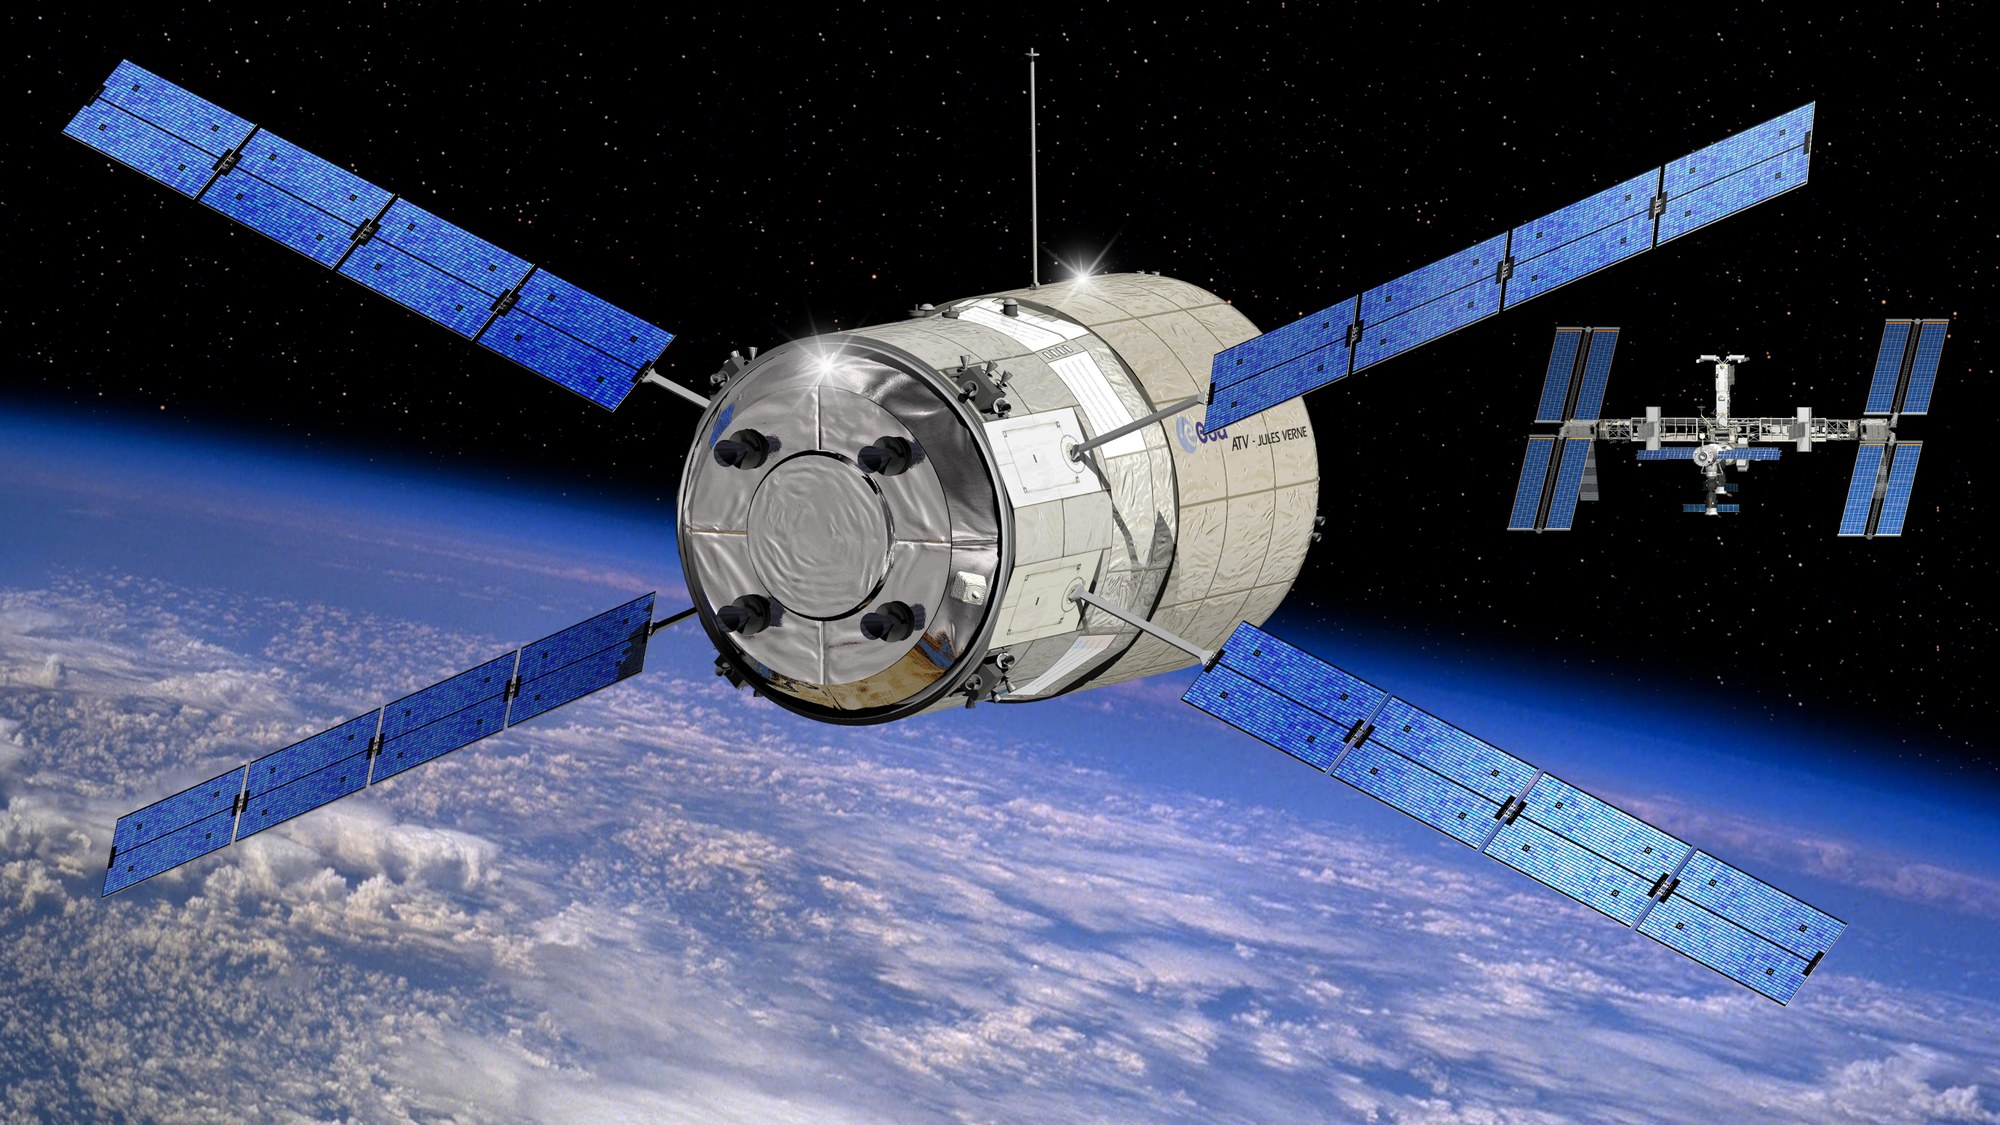 Artist's impression of the Automated Transfer Vehicle approaching the International Space Station.